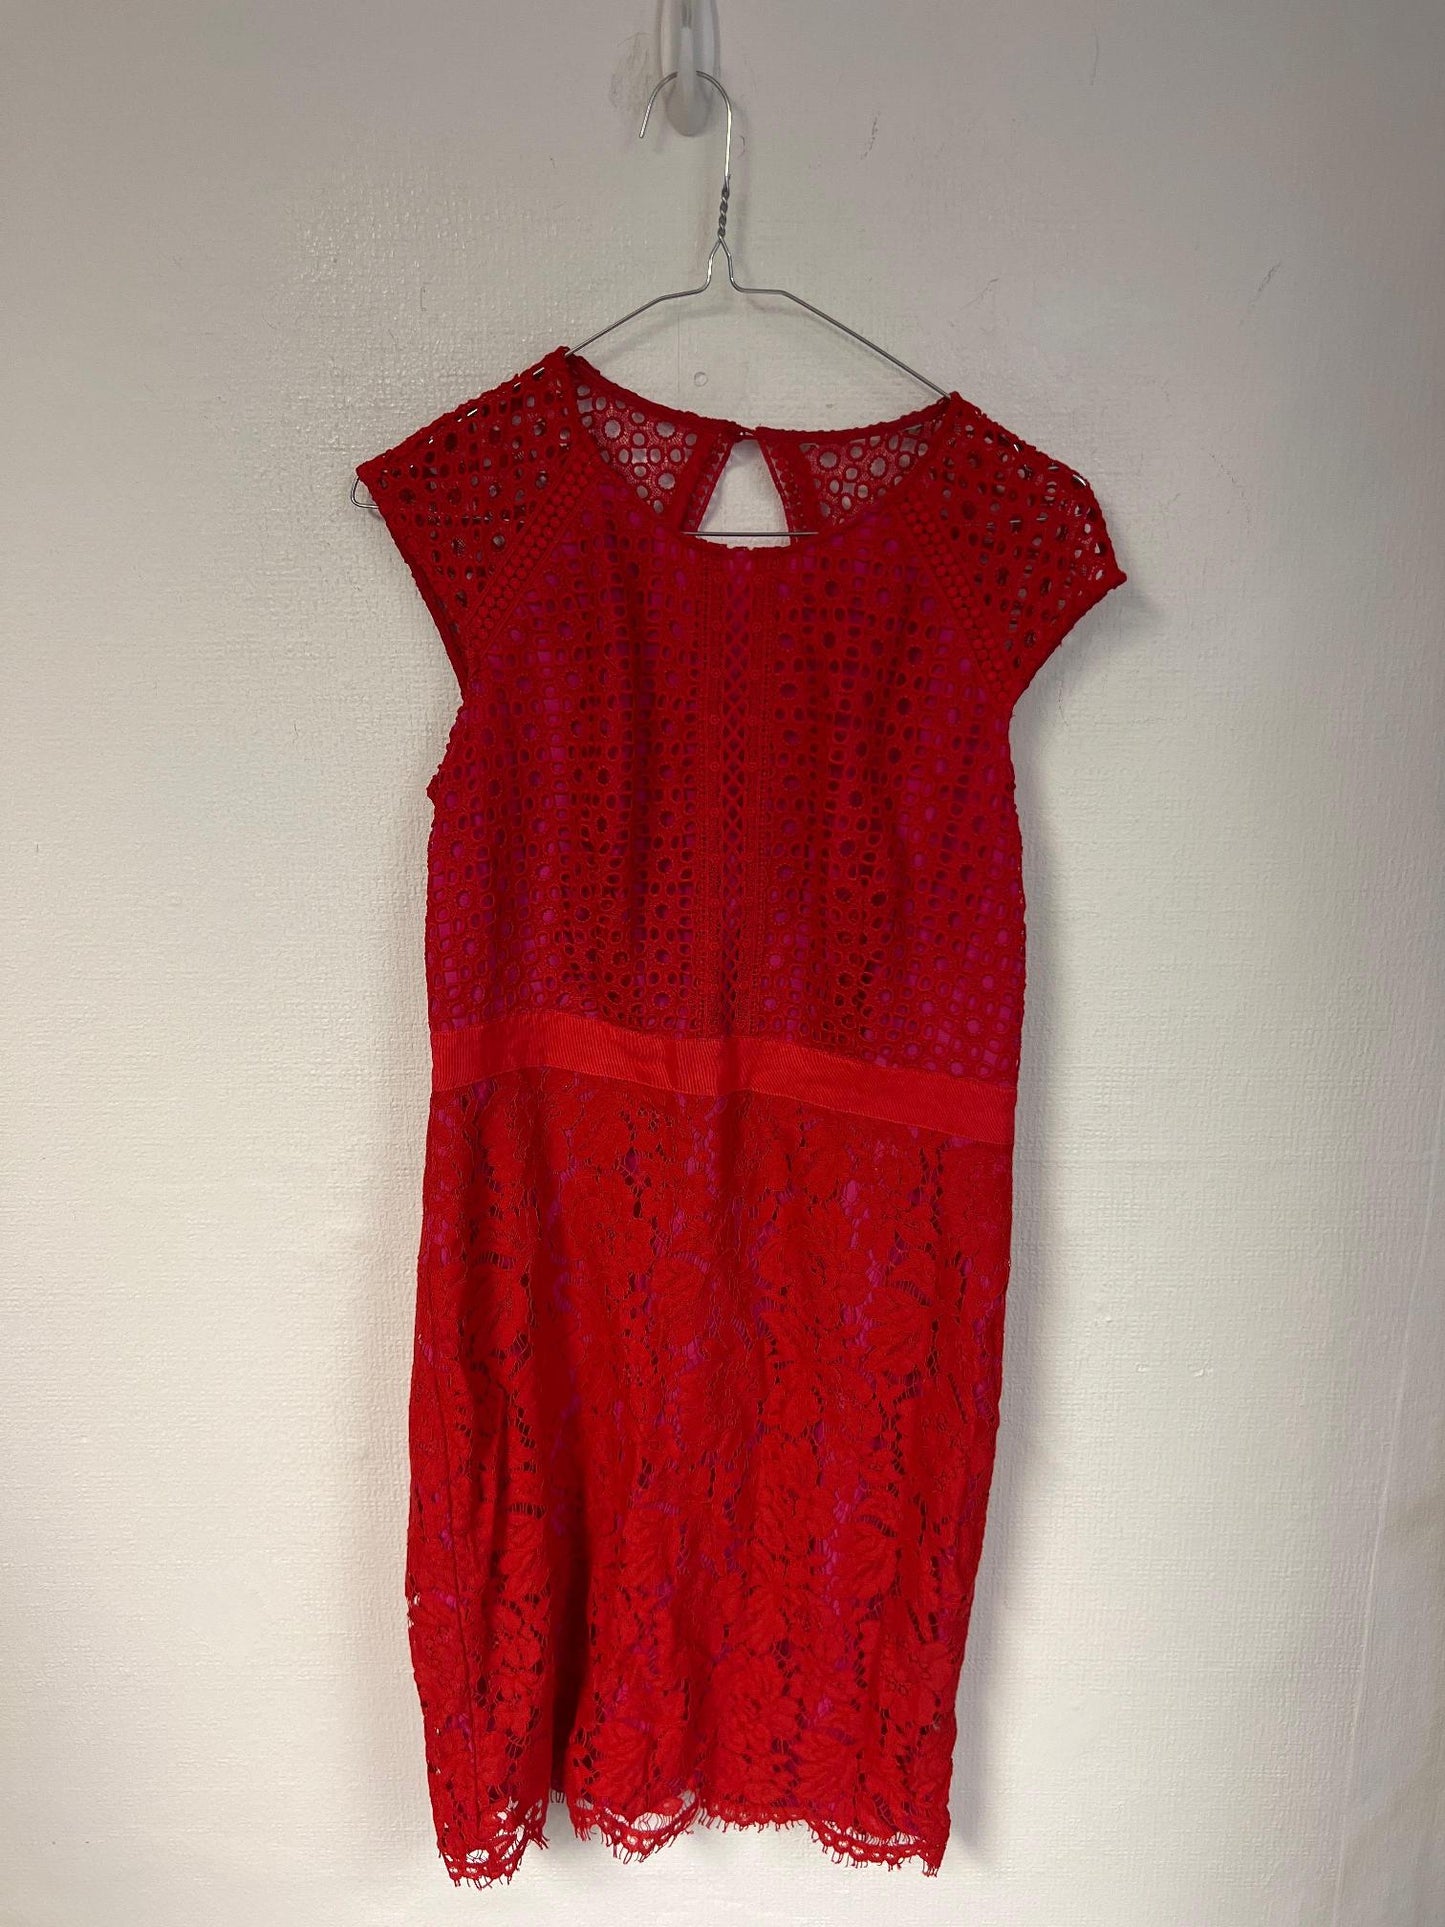 Red and pink lace midi dress, Next, Size 12 - Damaged Item Sale